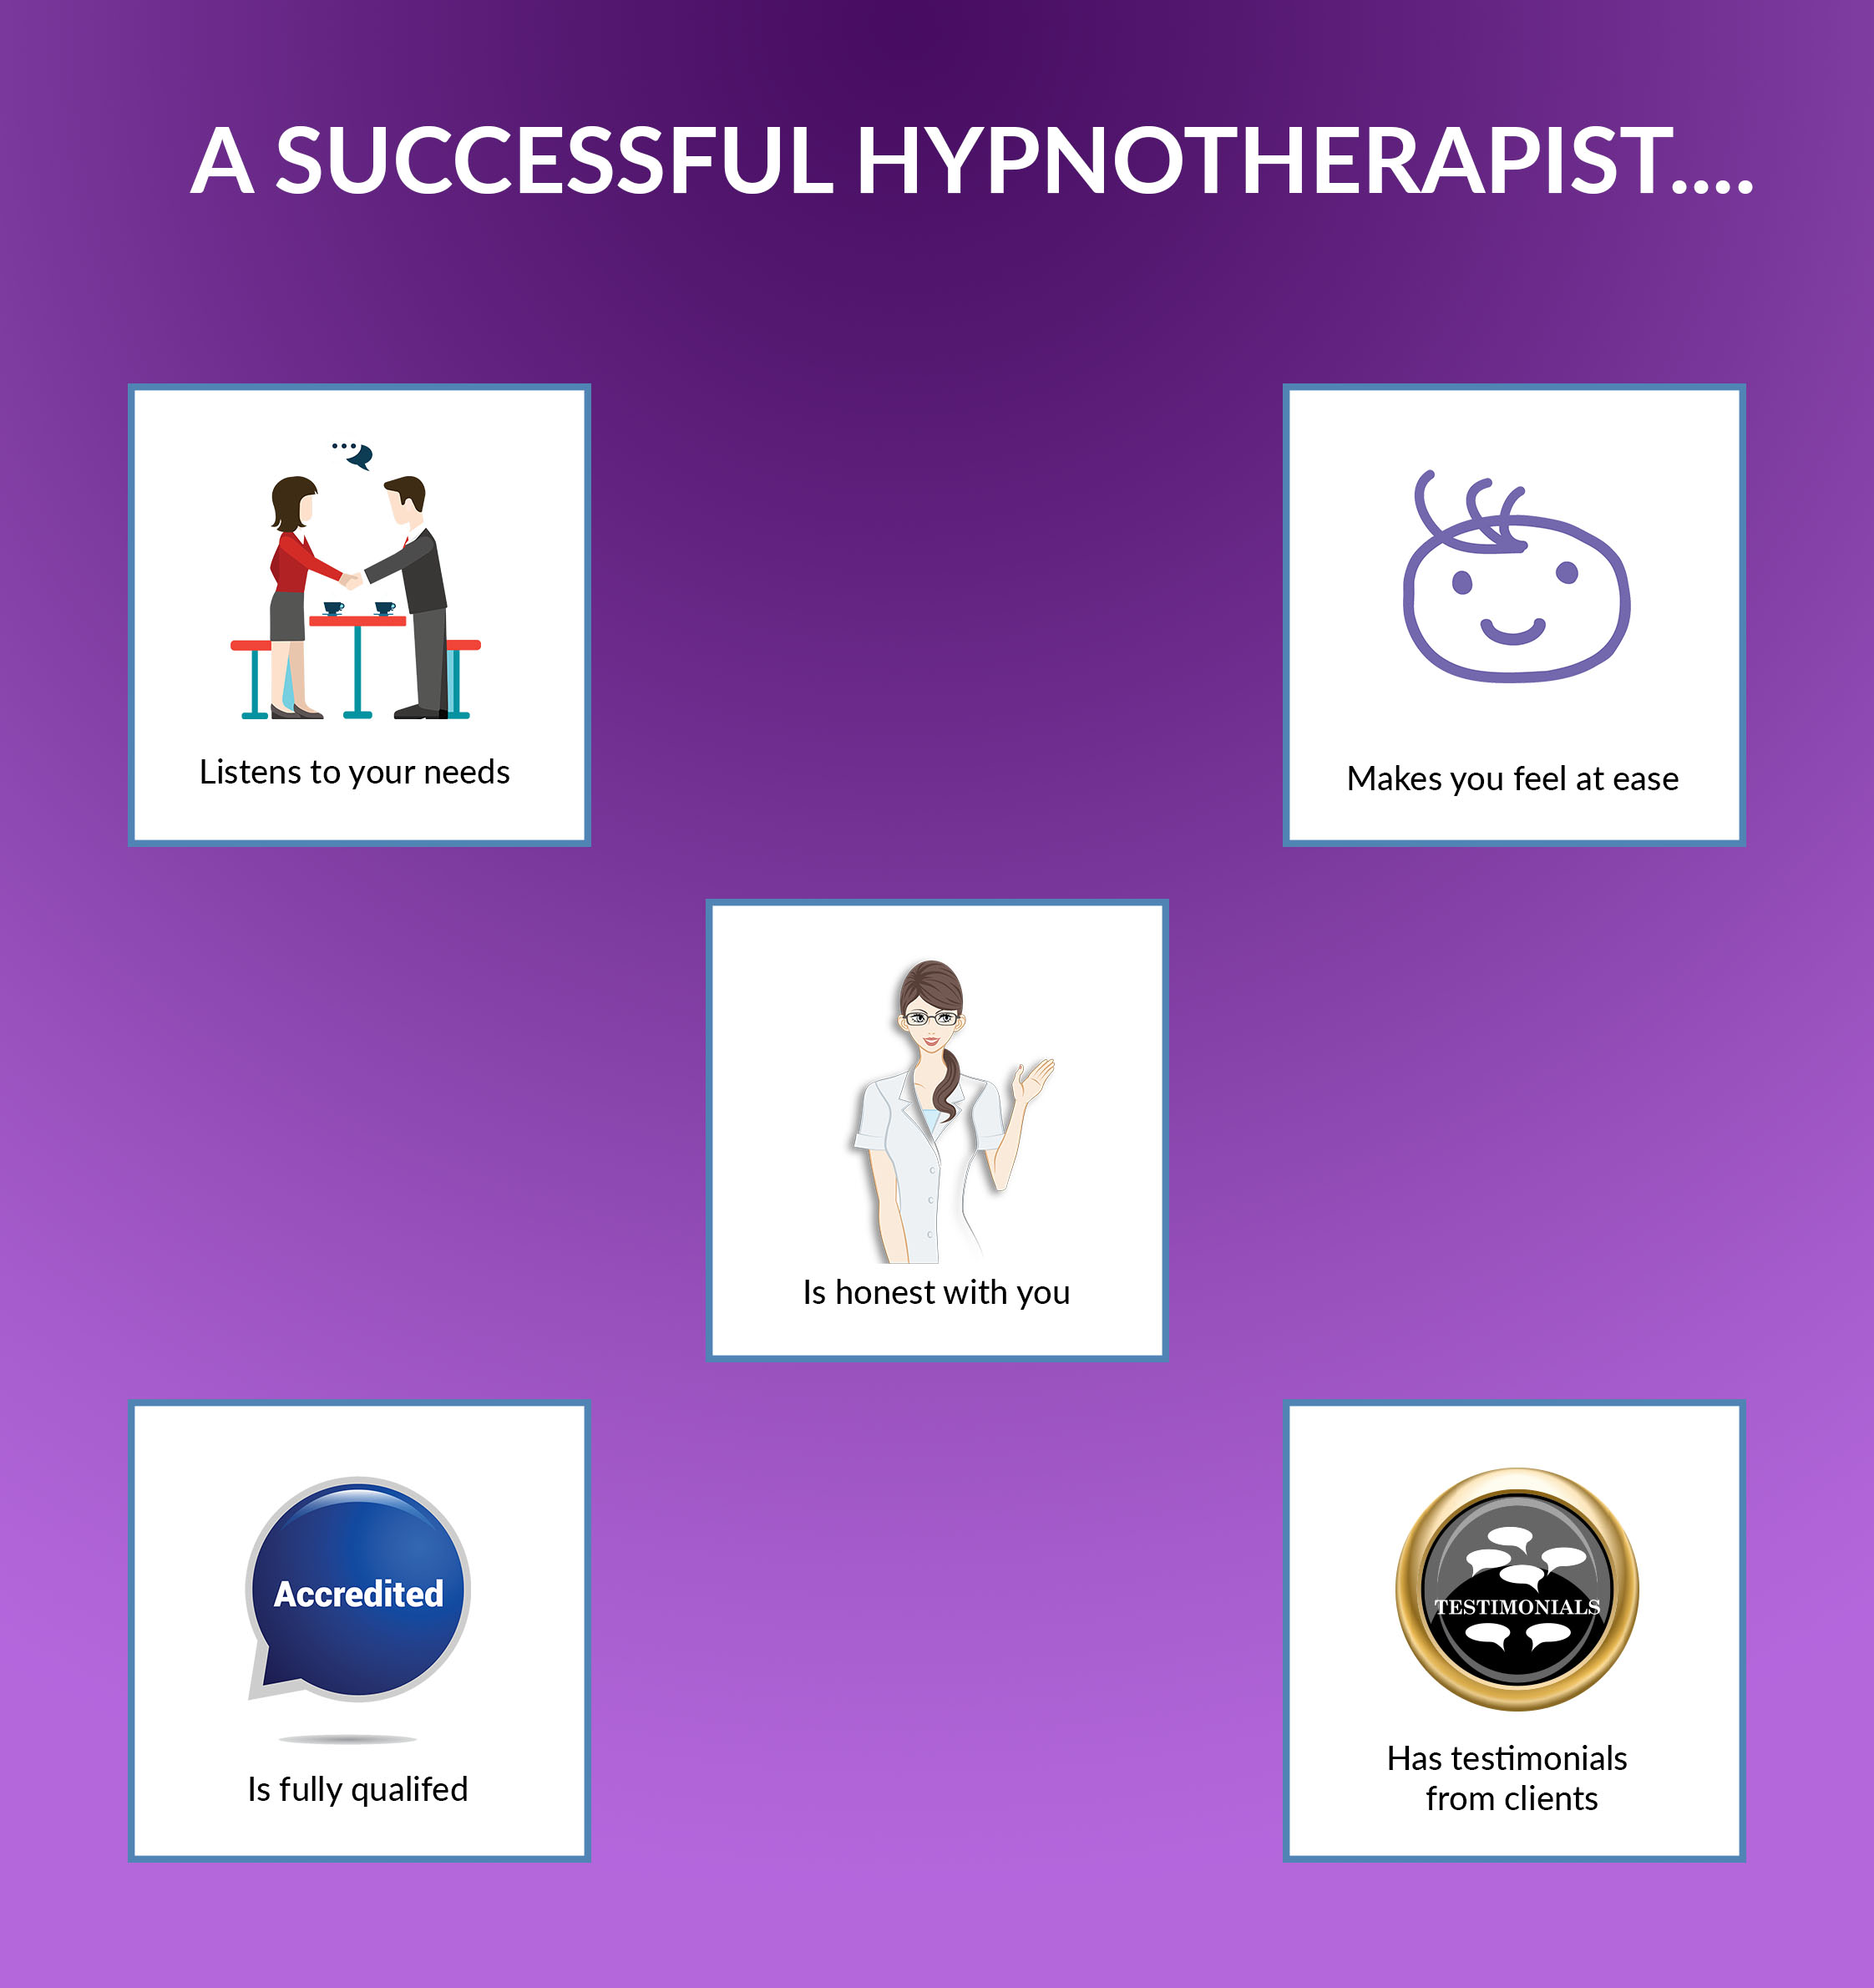 What to look for when you are selecting a hypnotherapist